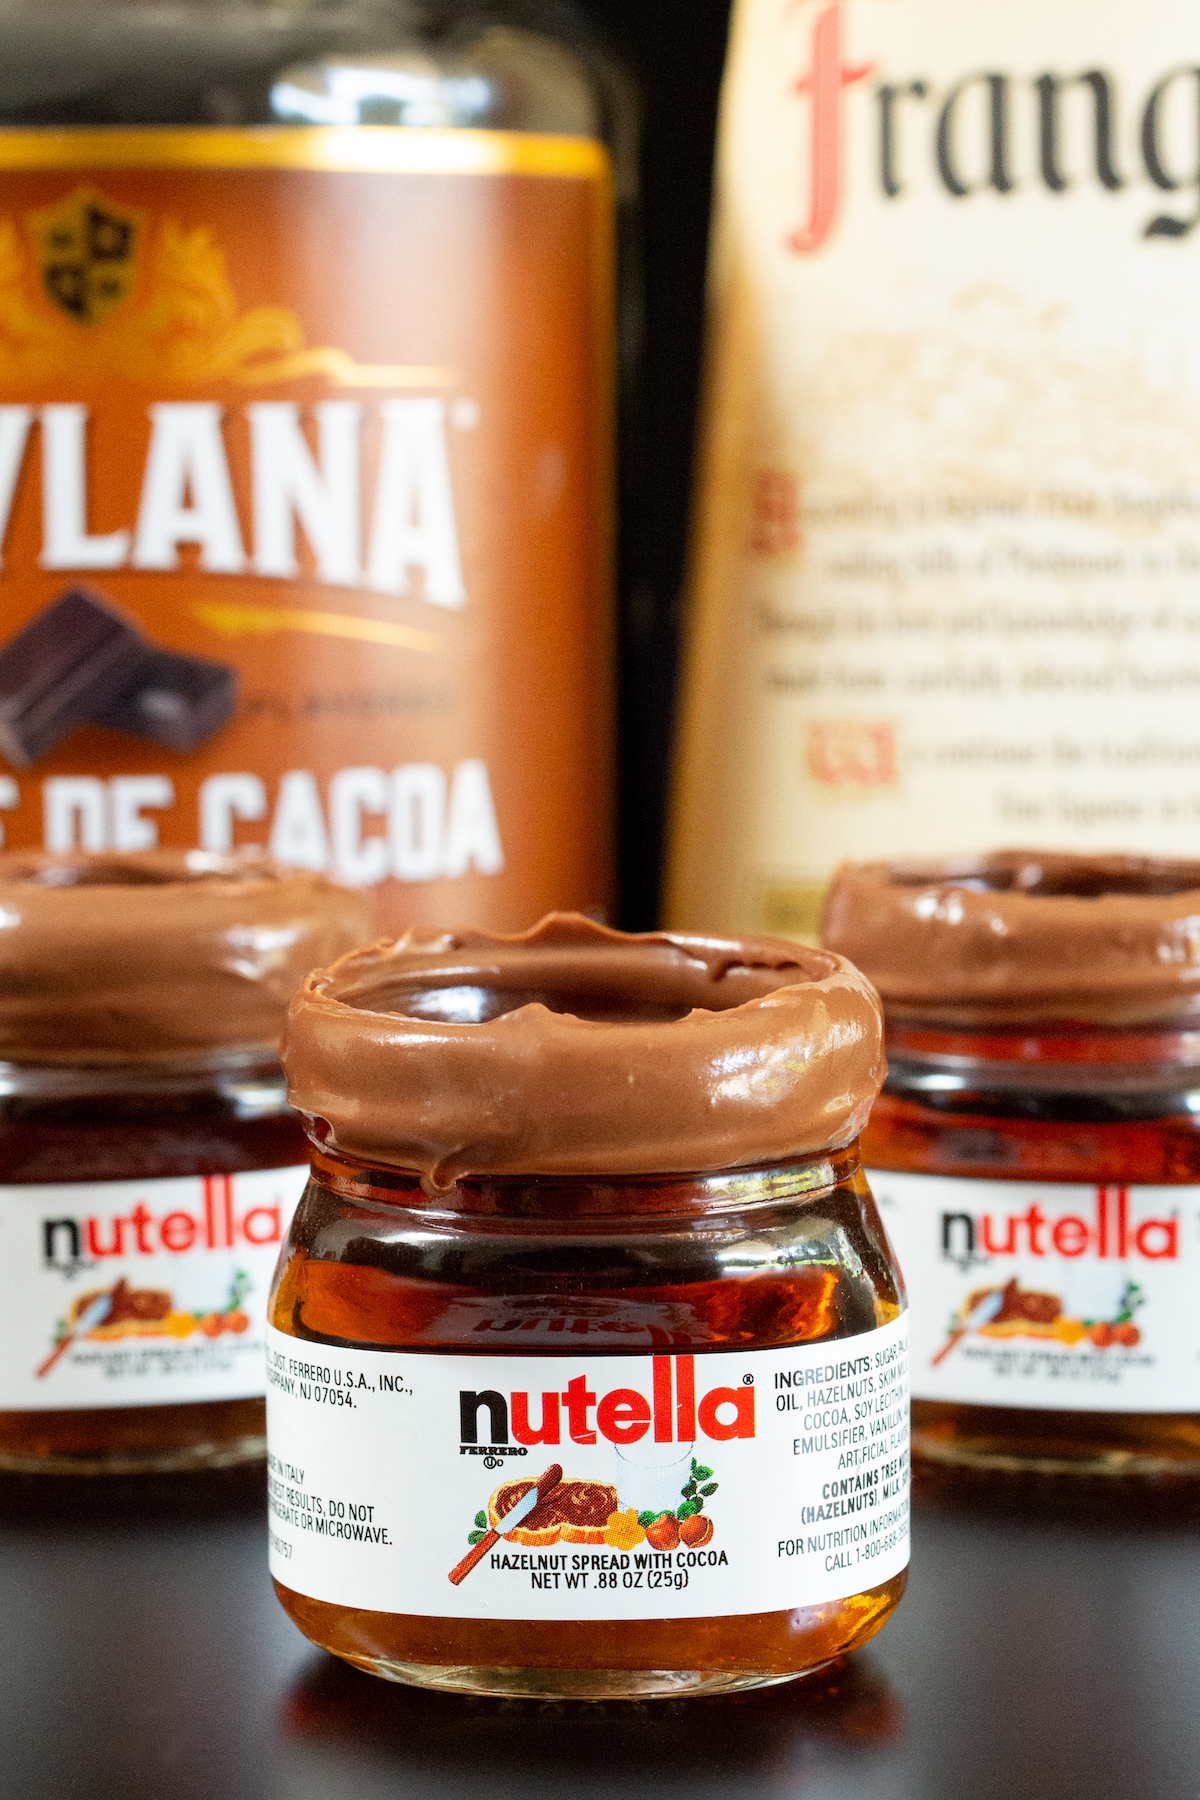 Three miniature Nutella jars with Nutella shots in them in front of creme de cacao and Fragelico liqueur bottles.